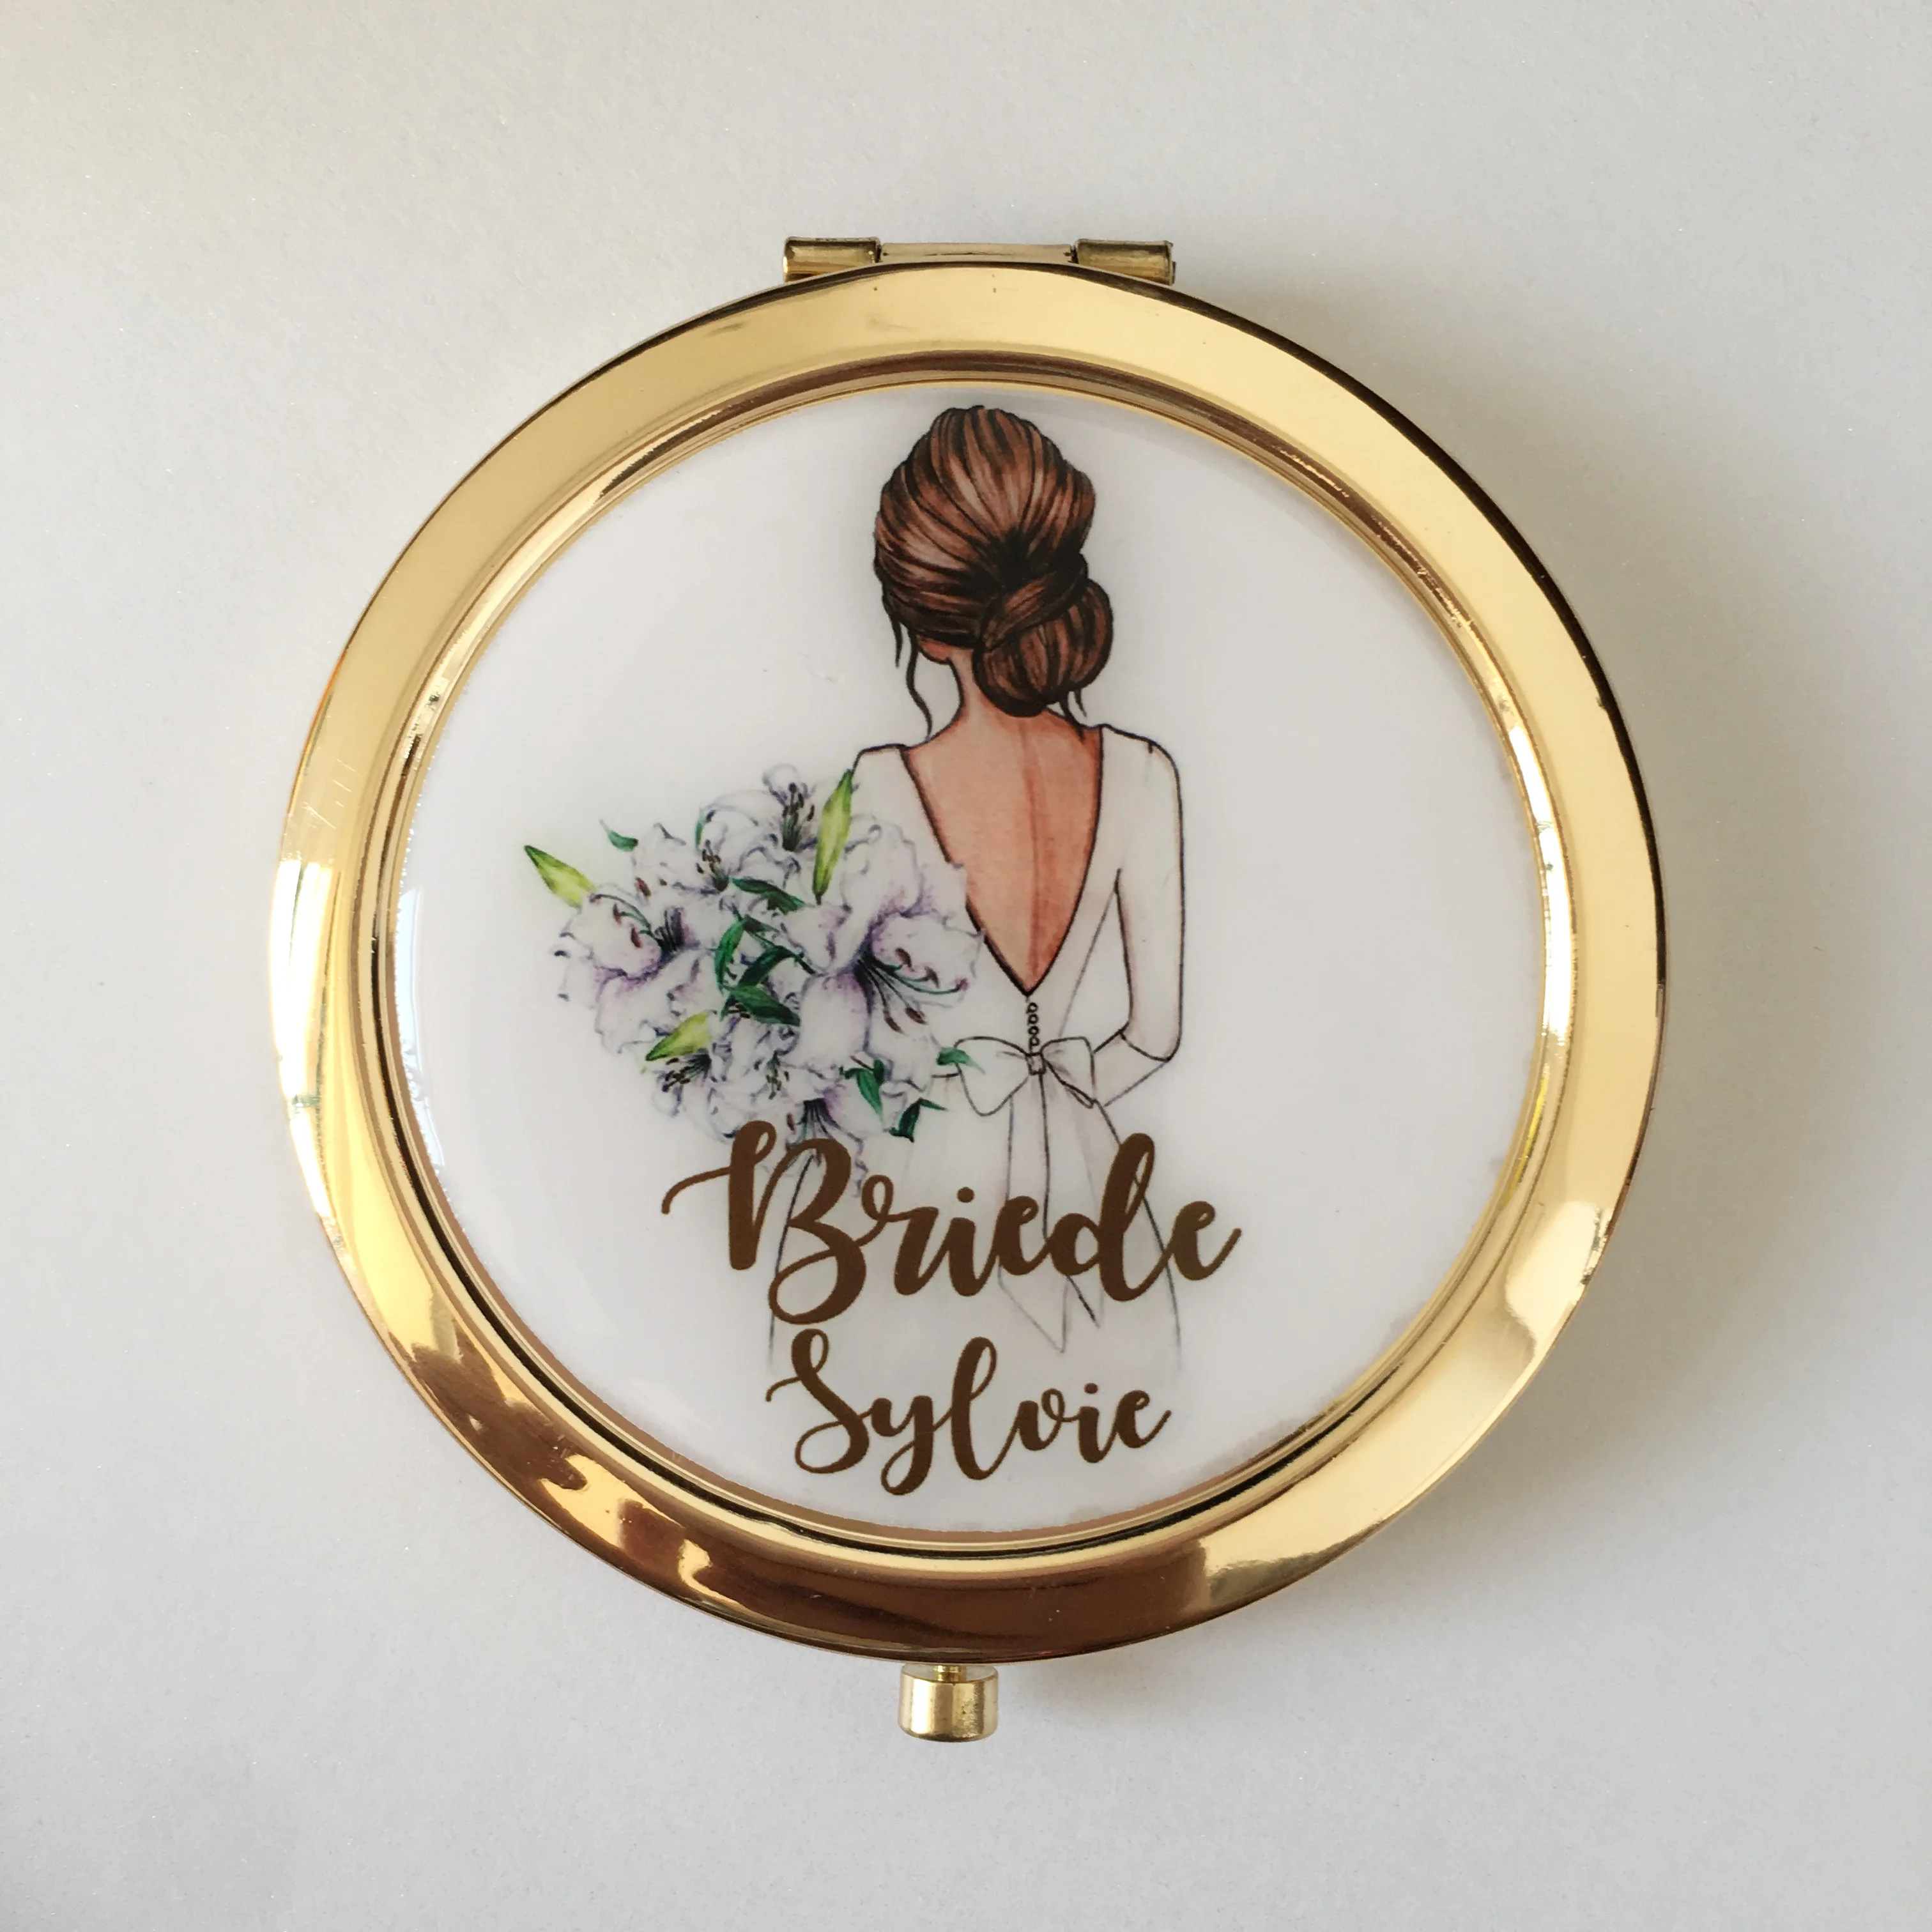 Green and White Compact Mirrors with White Rose, Personalized Compact Hand  Mirrors, Bridesmaid Gifts, Unique Gifts